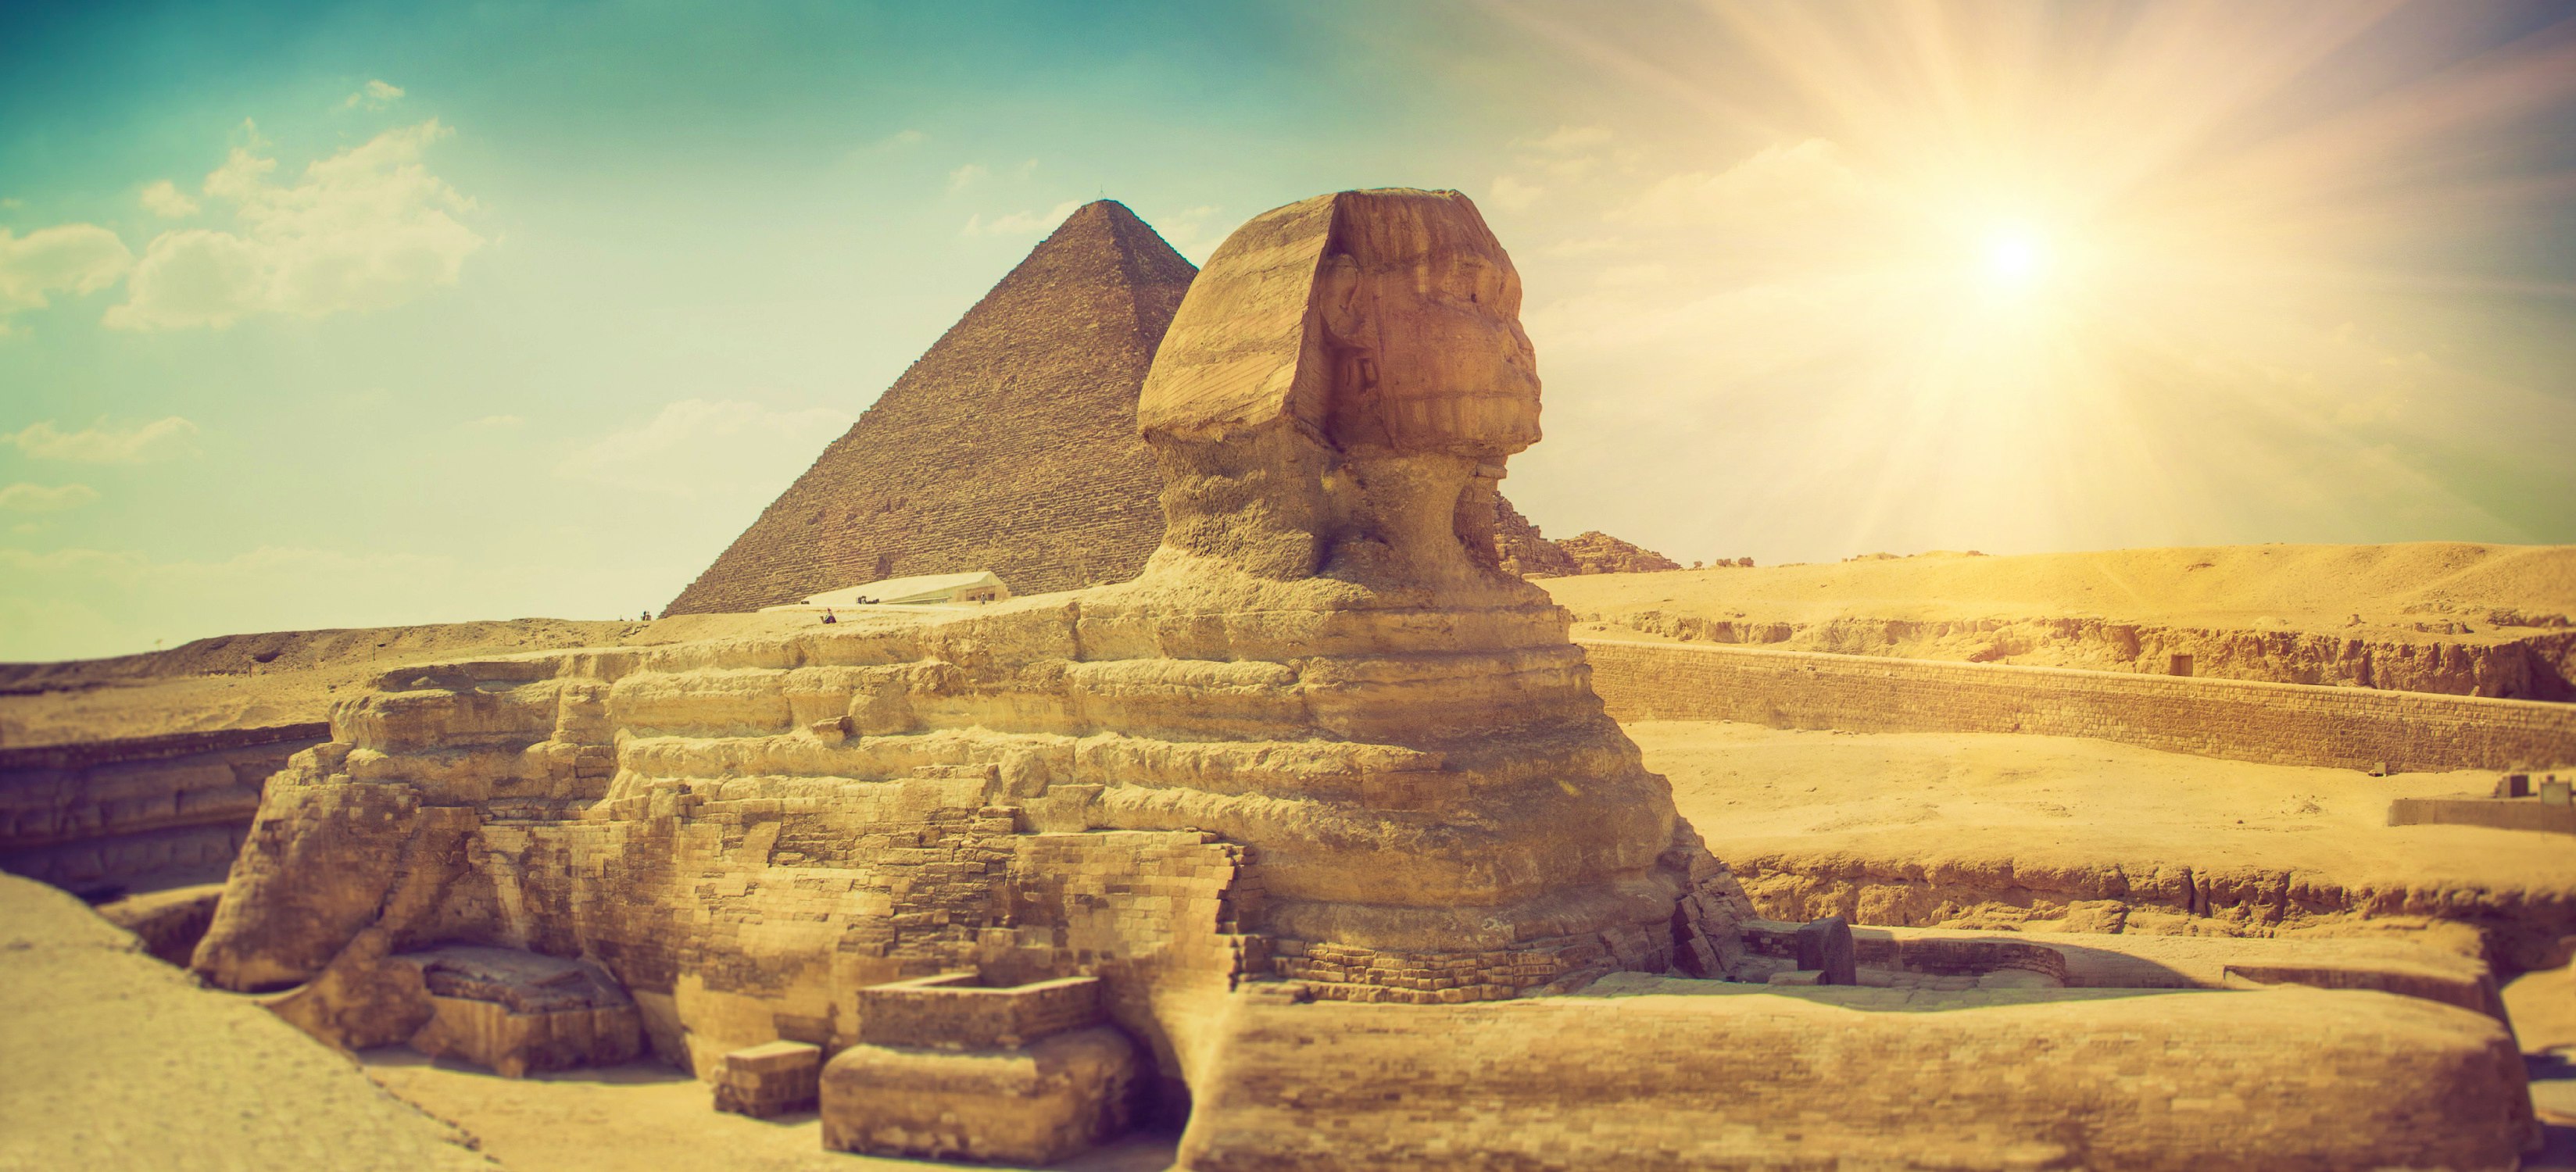 Panoramic view of the full profile of the Great Sphinx with the pyramid in the background in Giza. – © vovik_mar - Fotolia